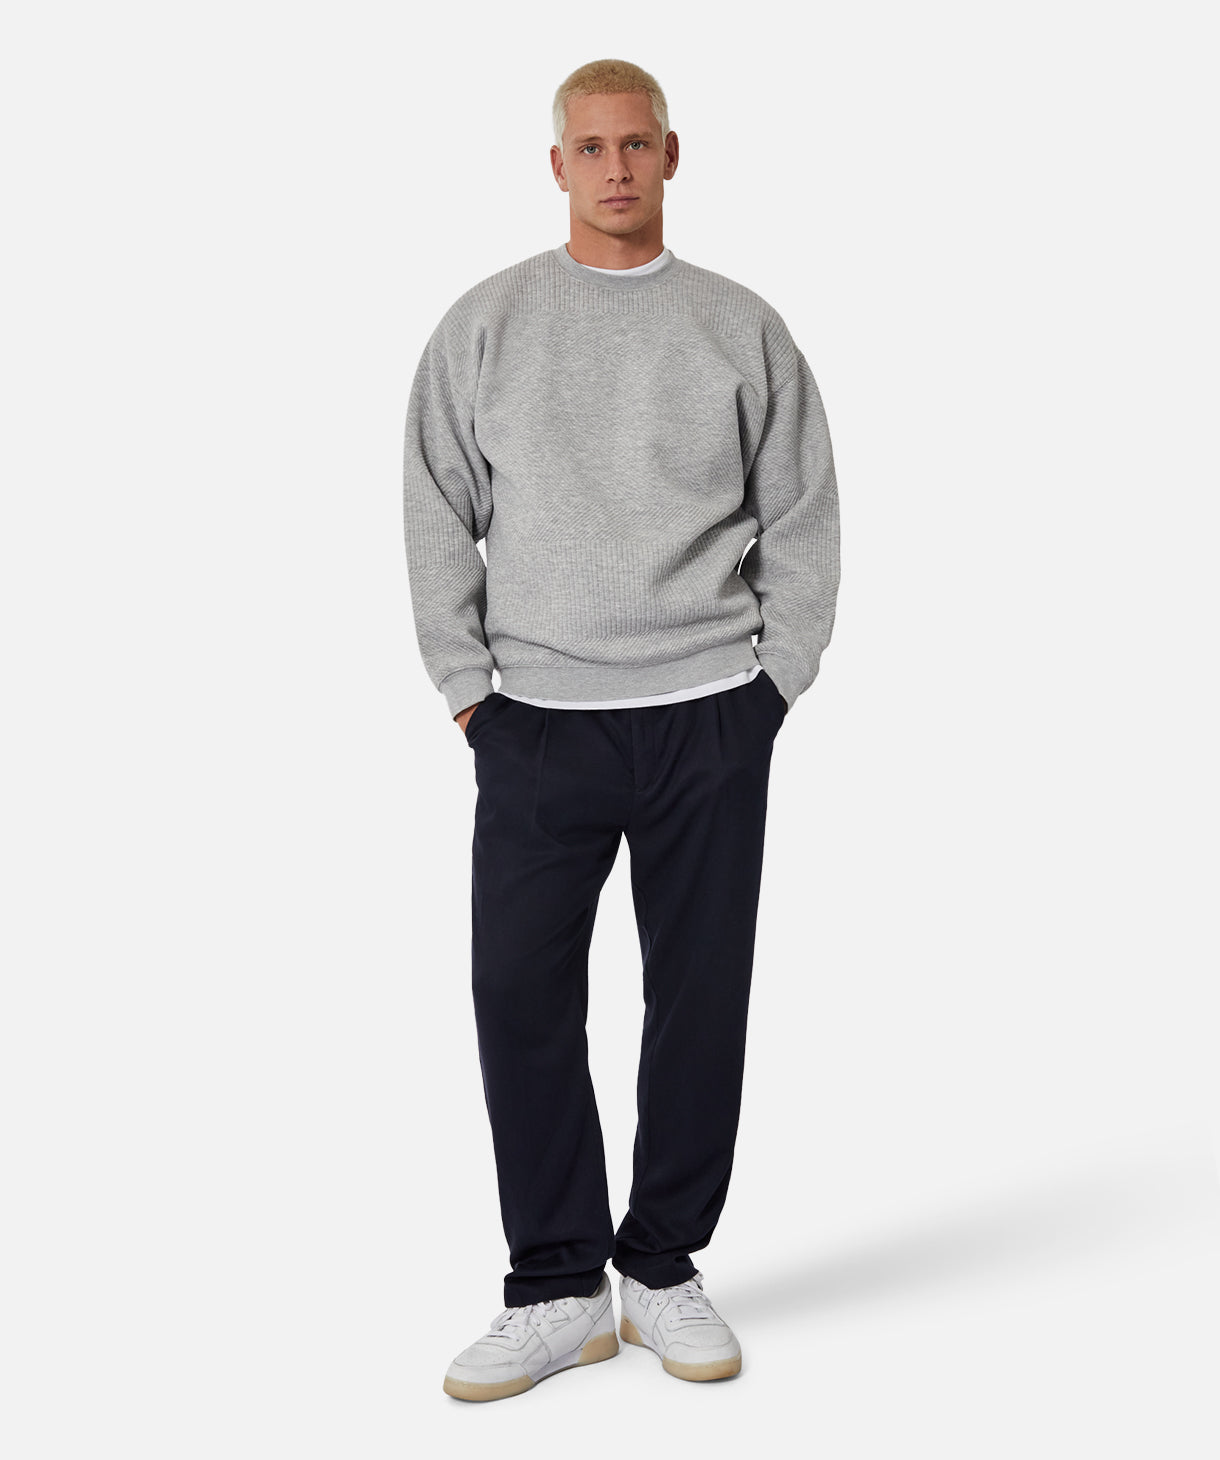 Shop The Robinson Sweat in Light Grey Marle | Industrie Clothing ...